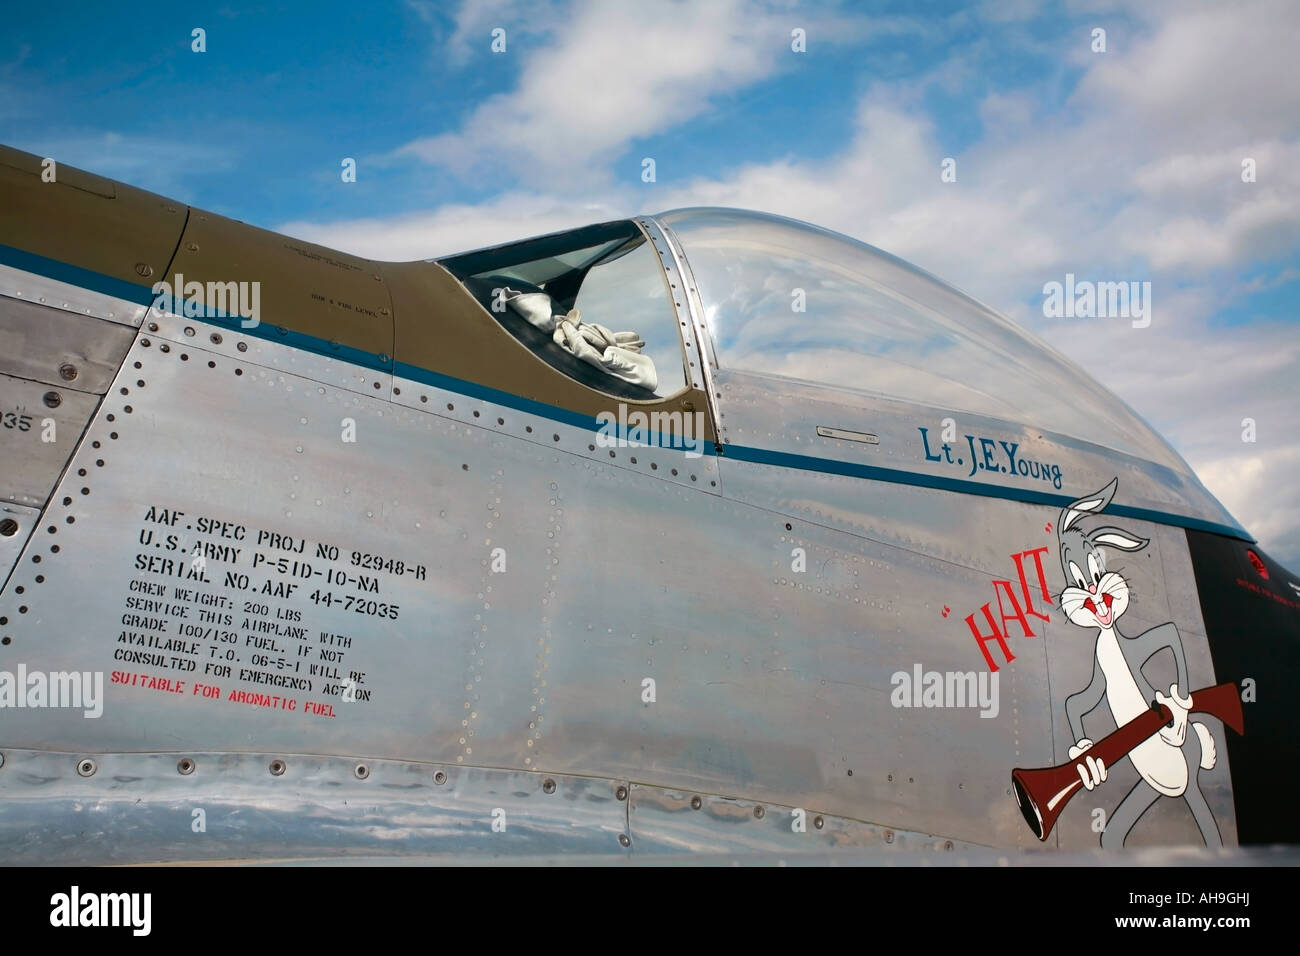 Nose art and markings on the Jumpin' Jacques P-51D-20-NA Mustang warbird Stock Photo